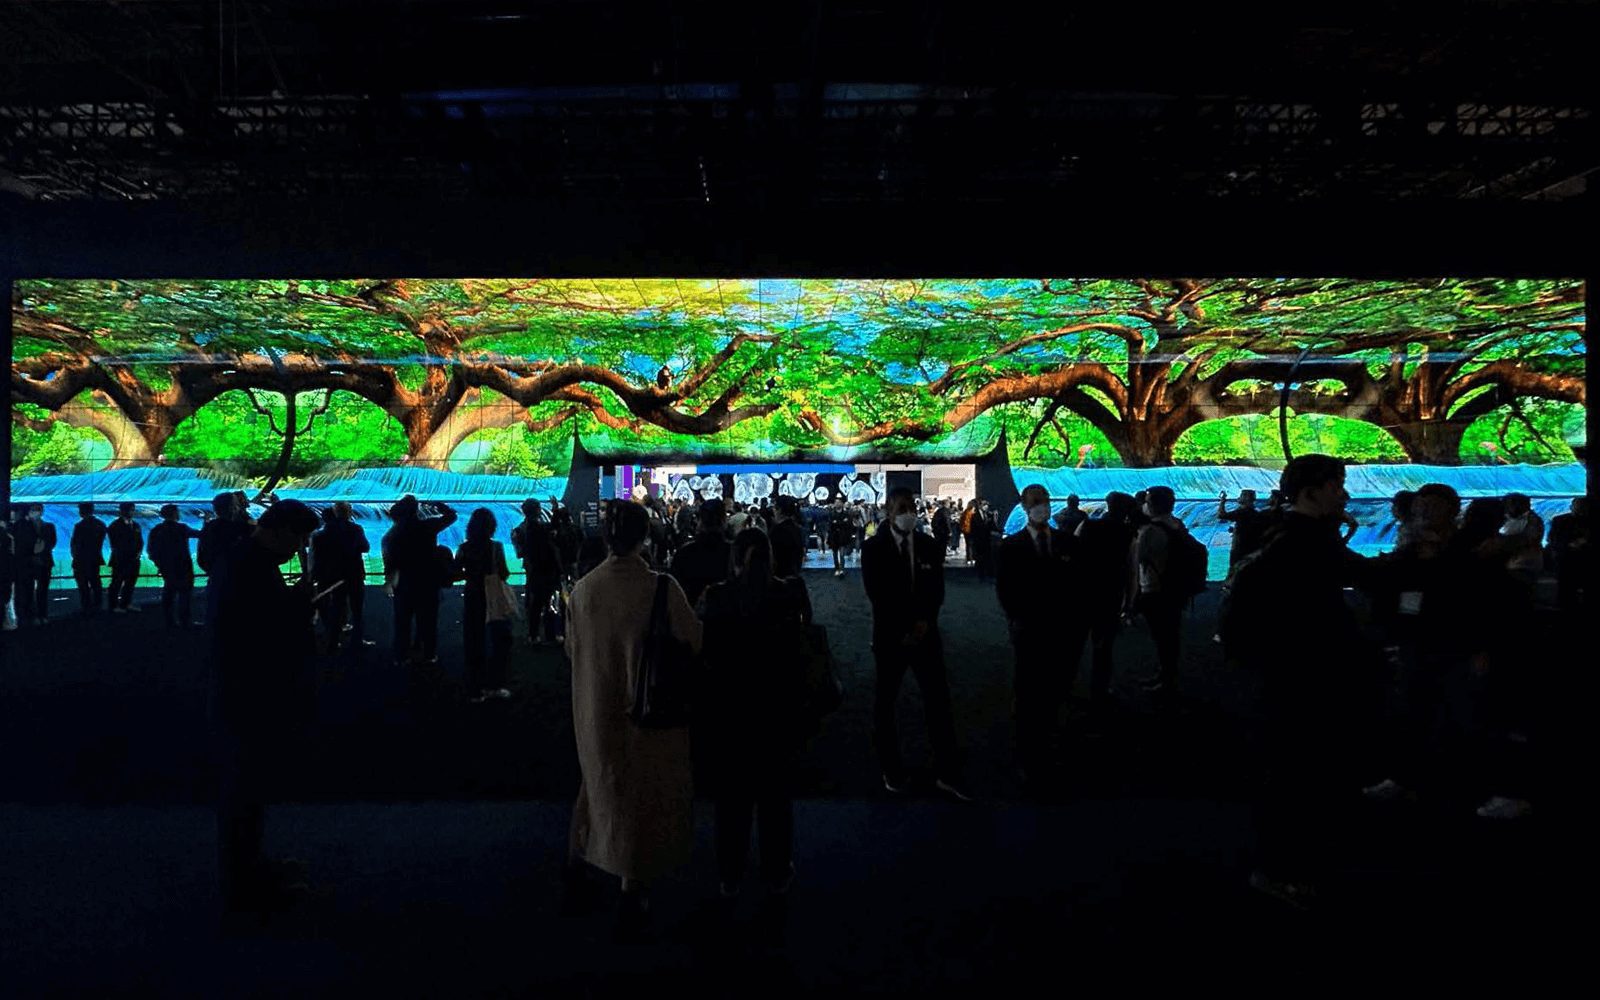 LG's enormous, curved video wall